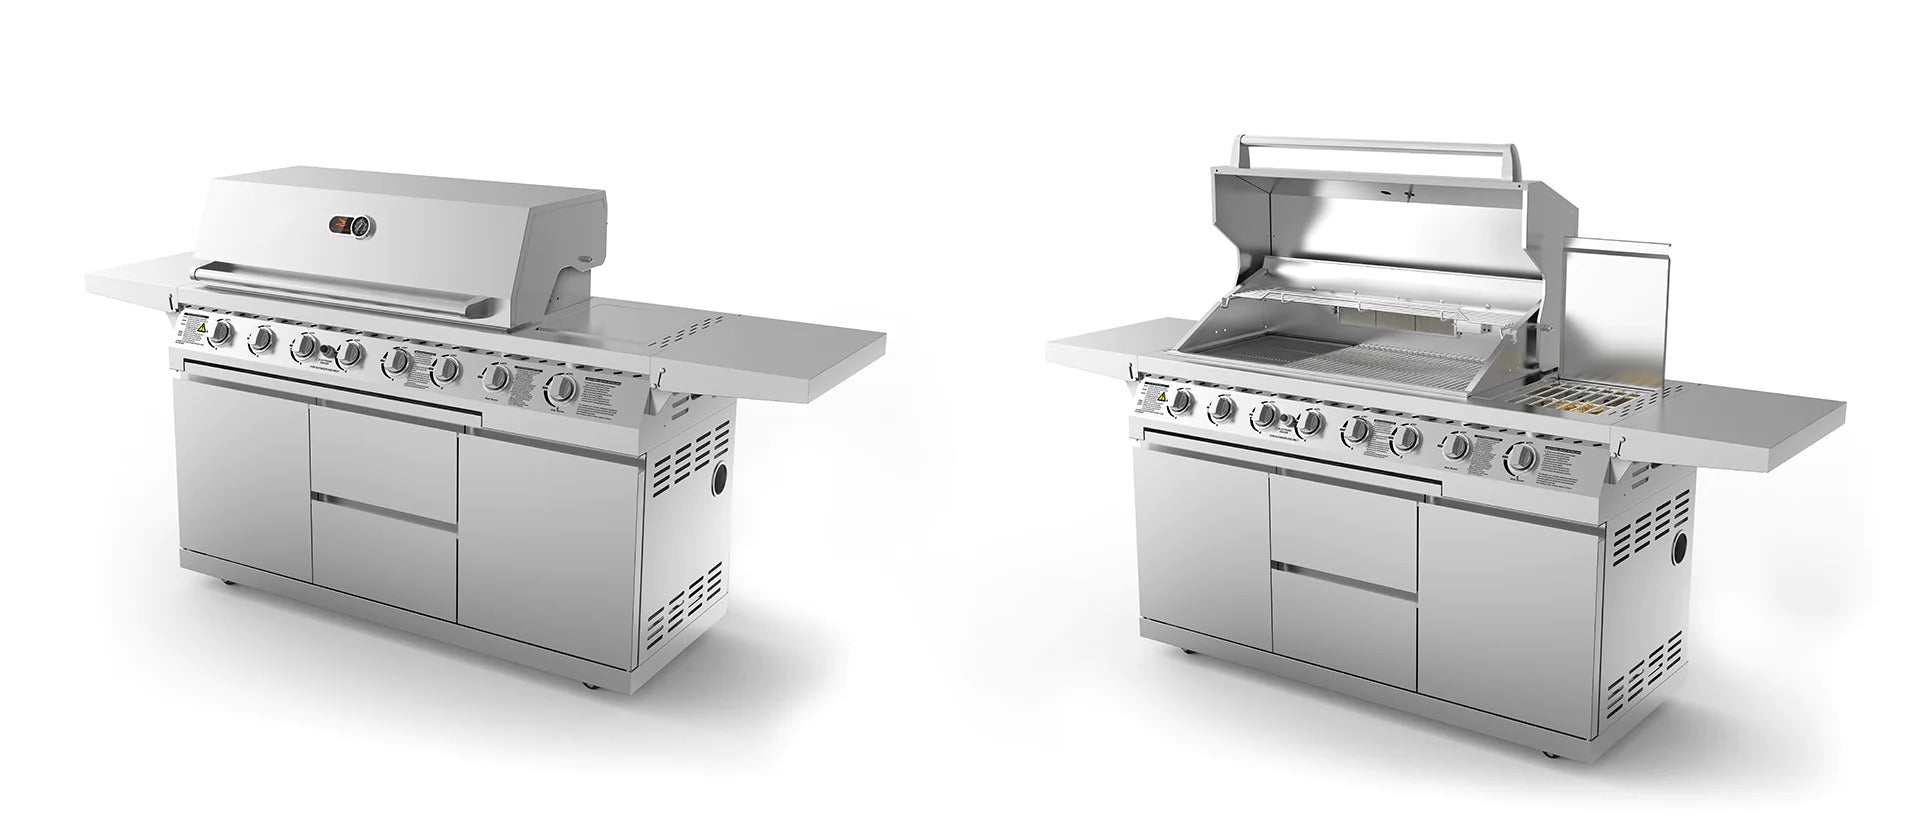 The Lechlade 4 Burner Outdoor Kitchen - Vookoo Lifestyle